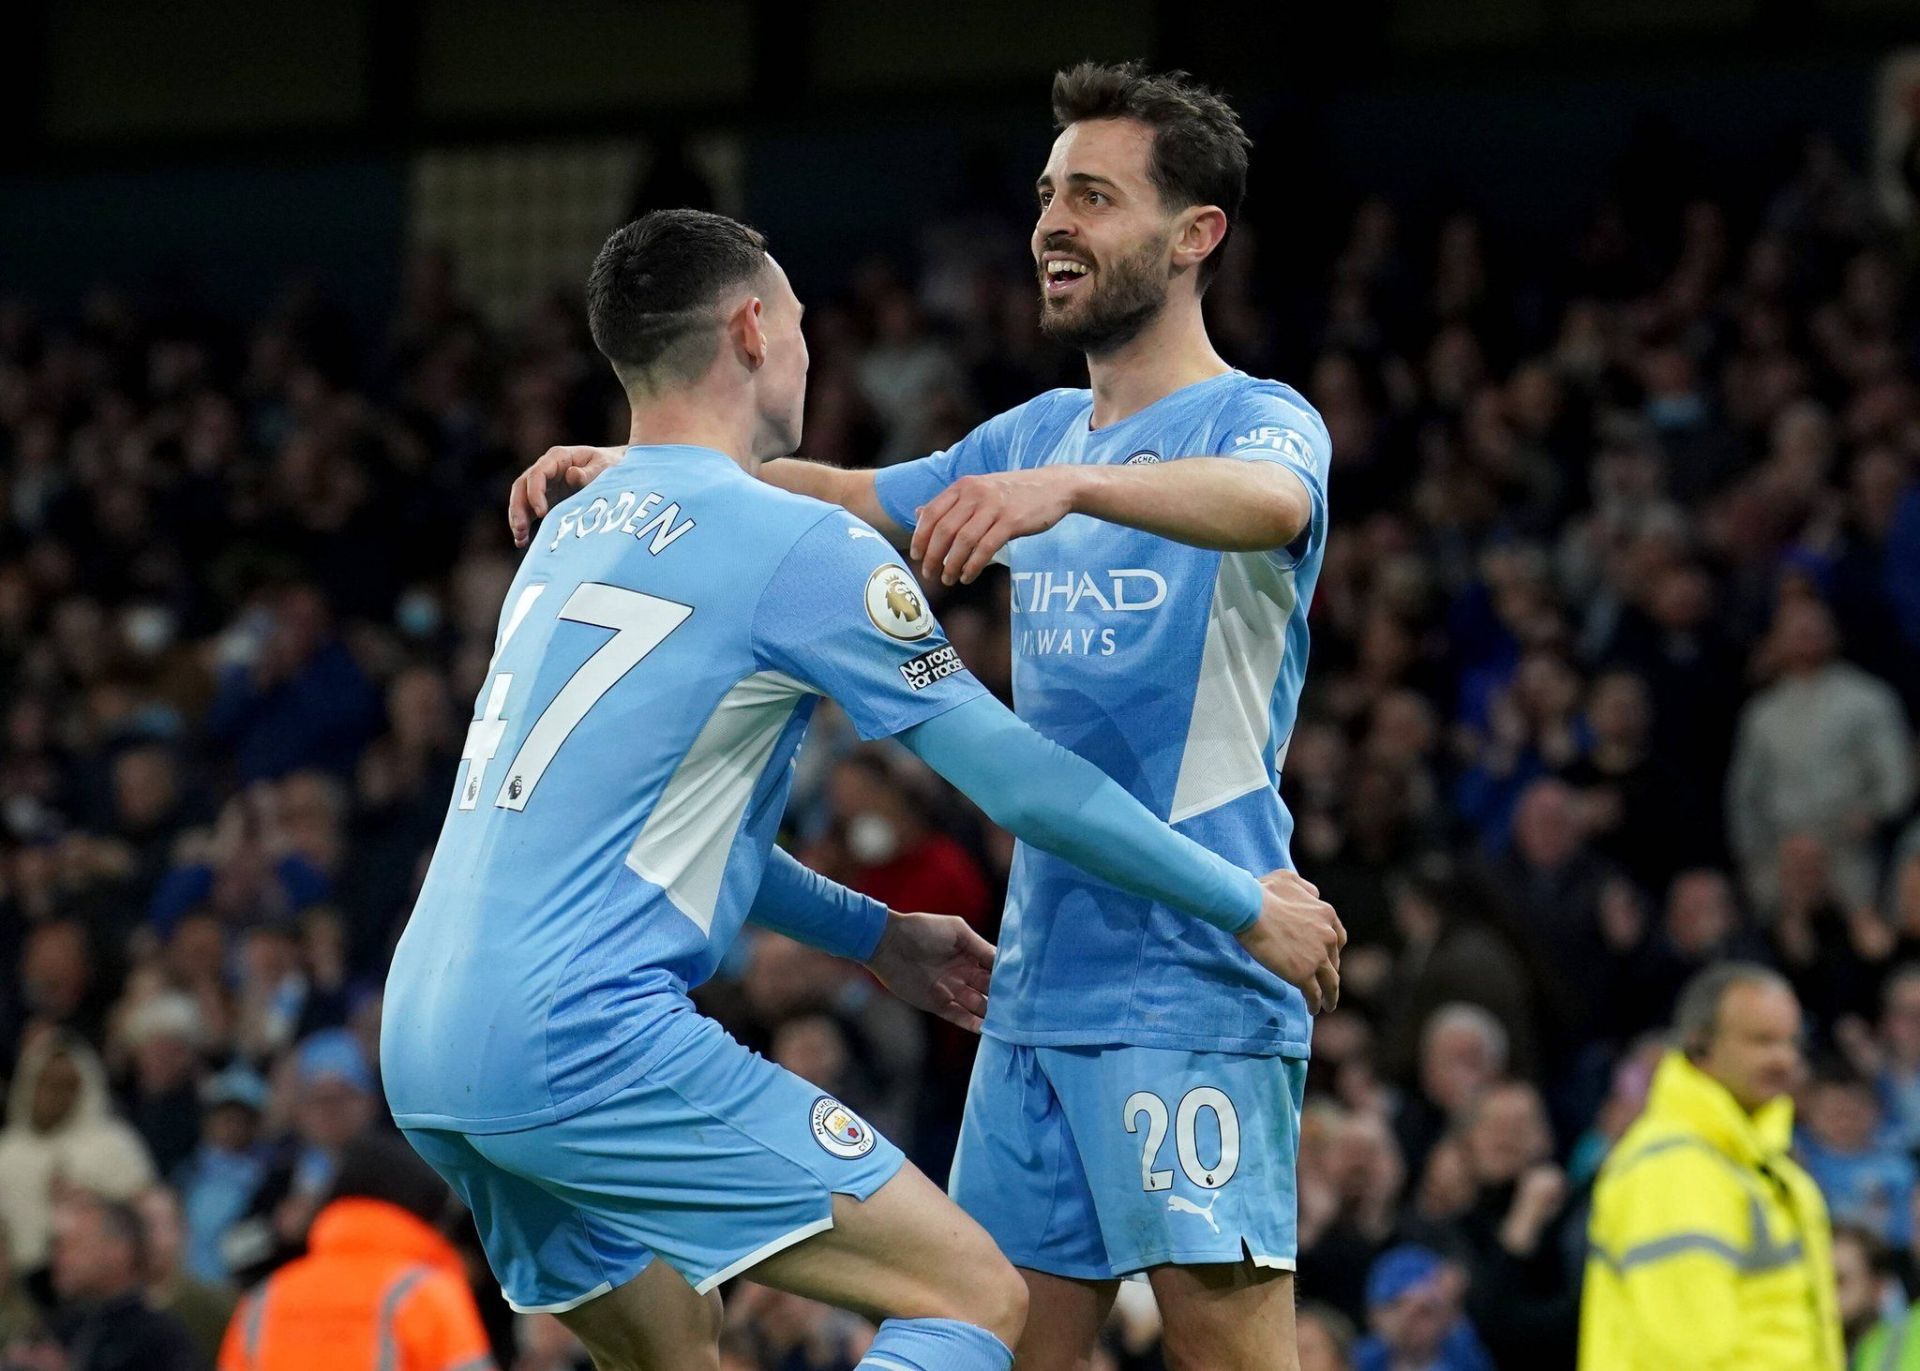 Manchester City returned to the top of the Premier League after beating Brighton.